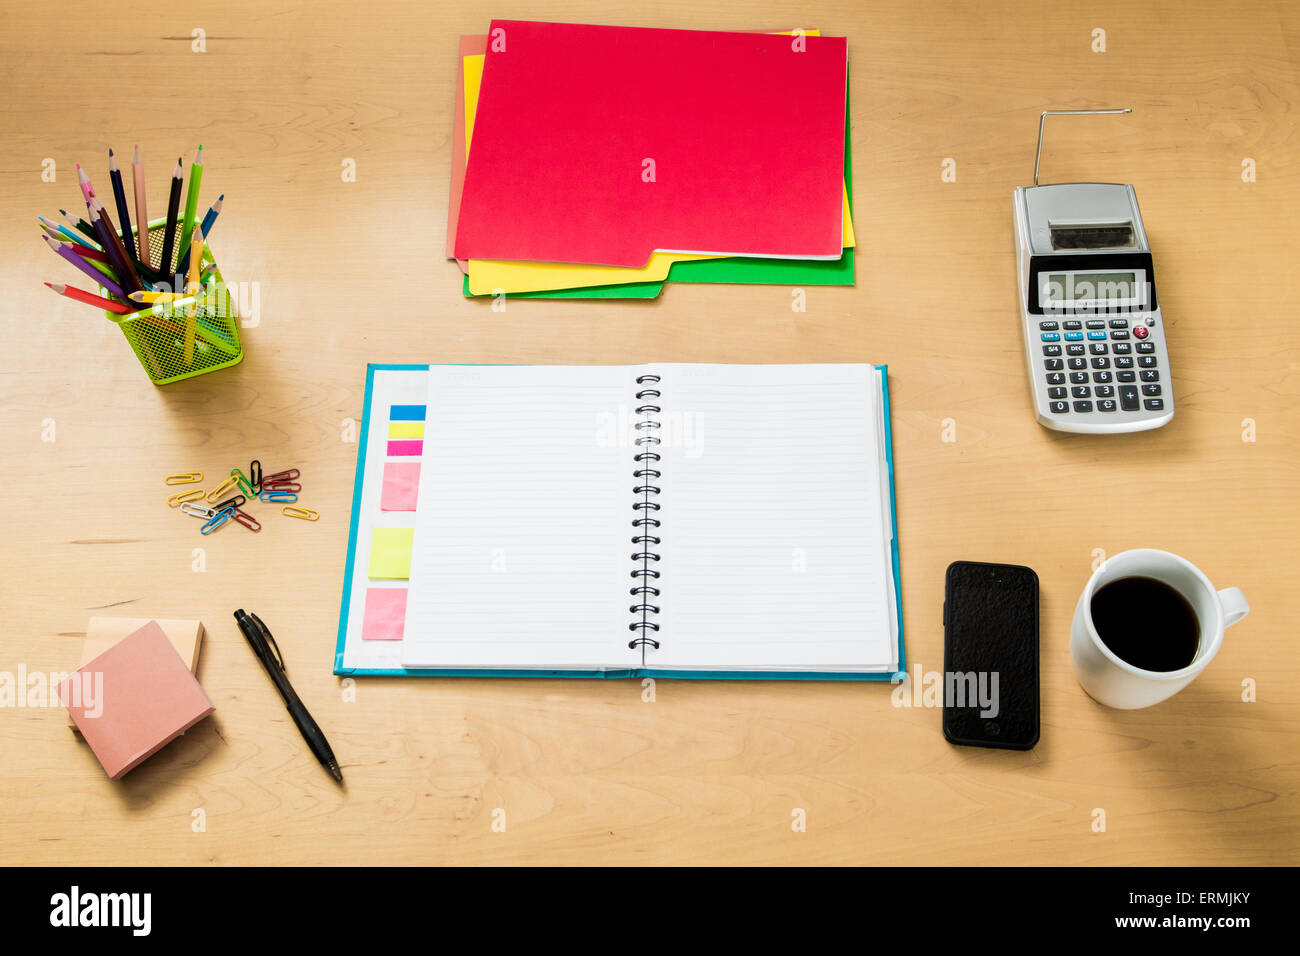 Modern creative workspace made of a flat wooden table, color pencils, a notebook,  coffee a smartphone and other objects Stock Photo